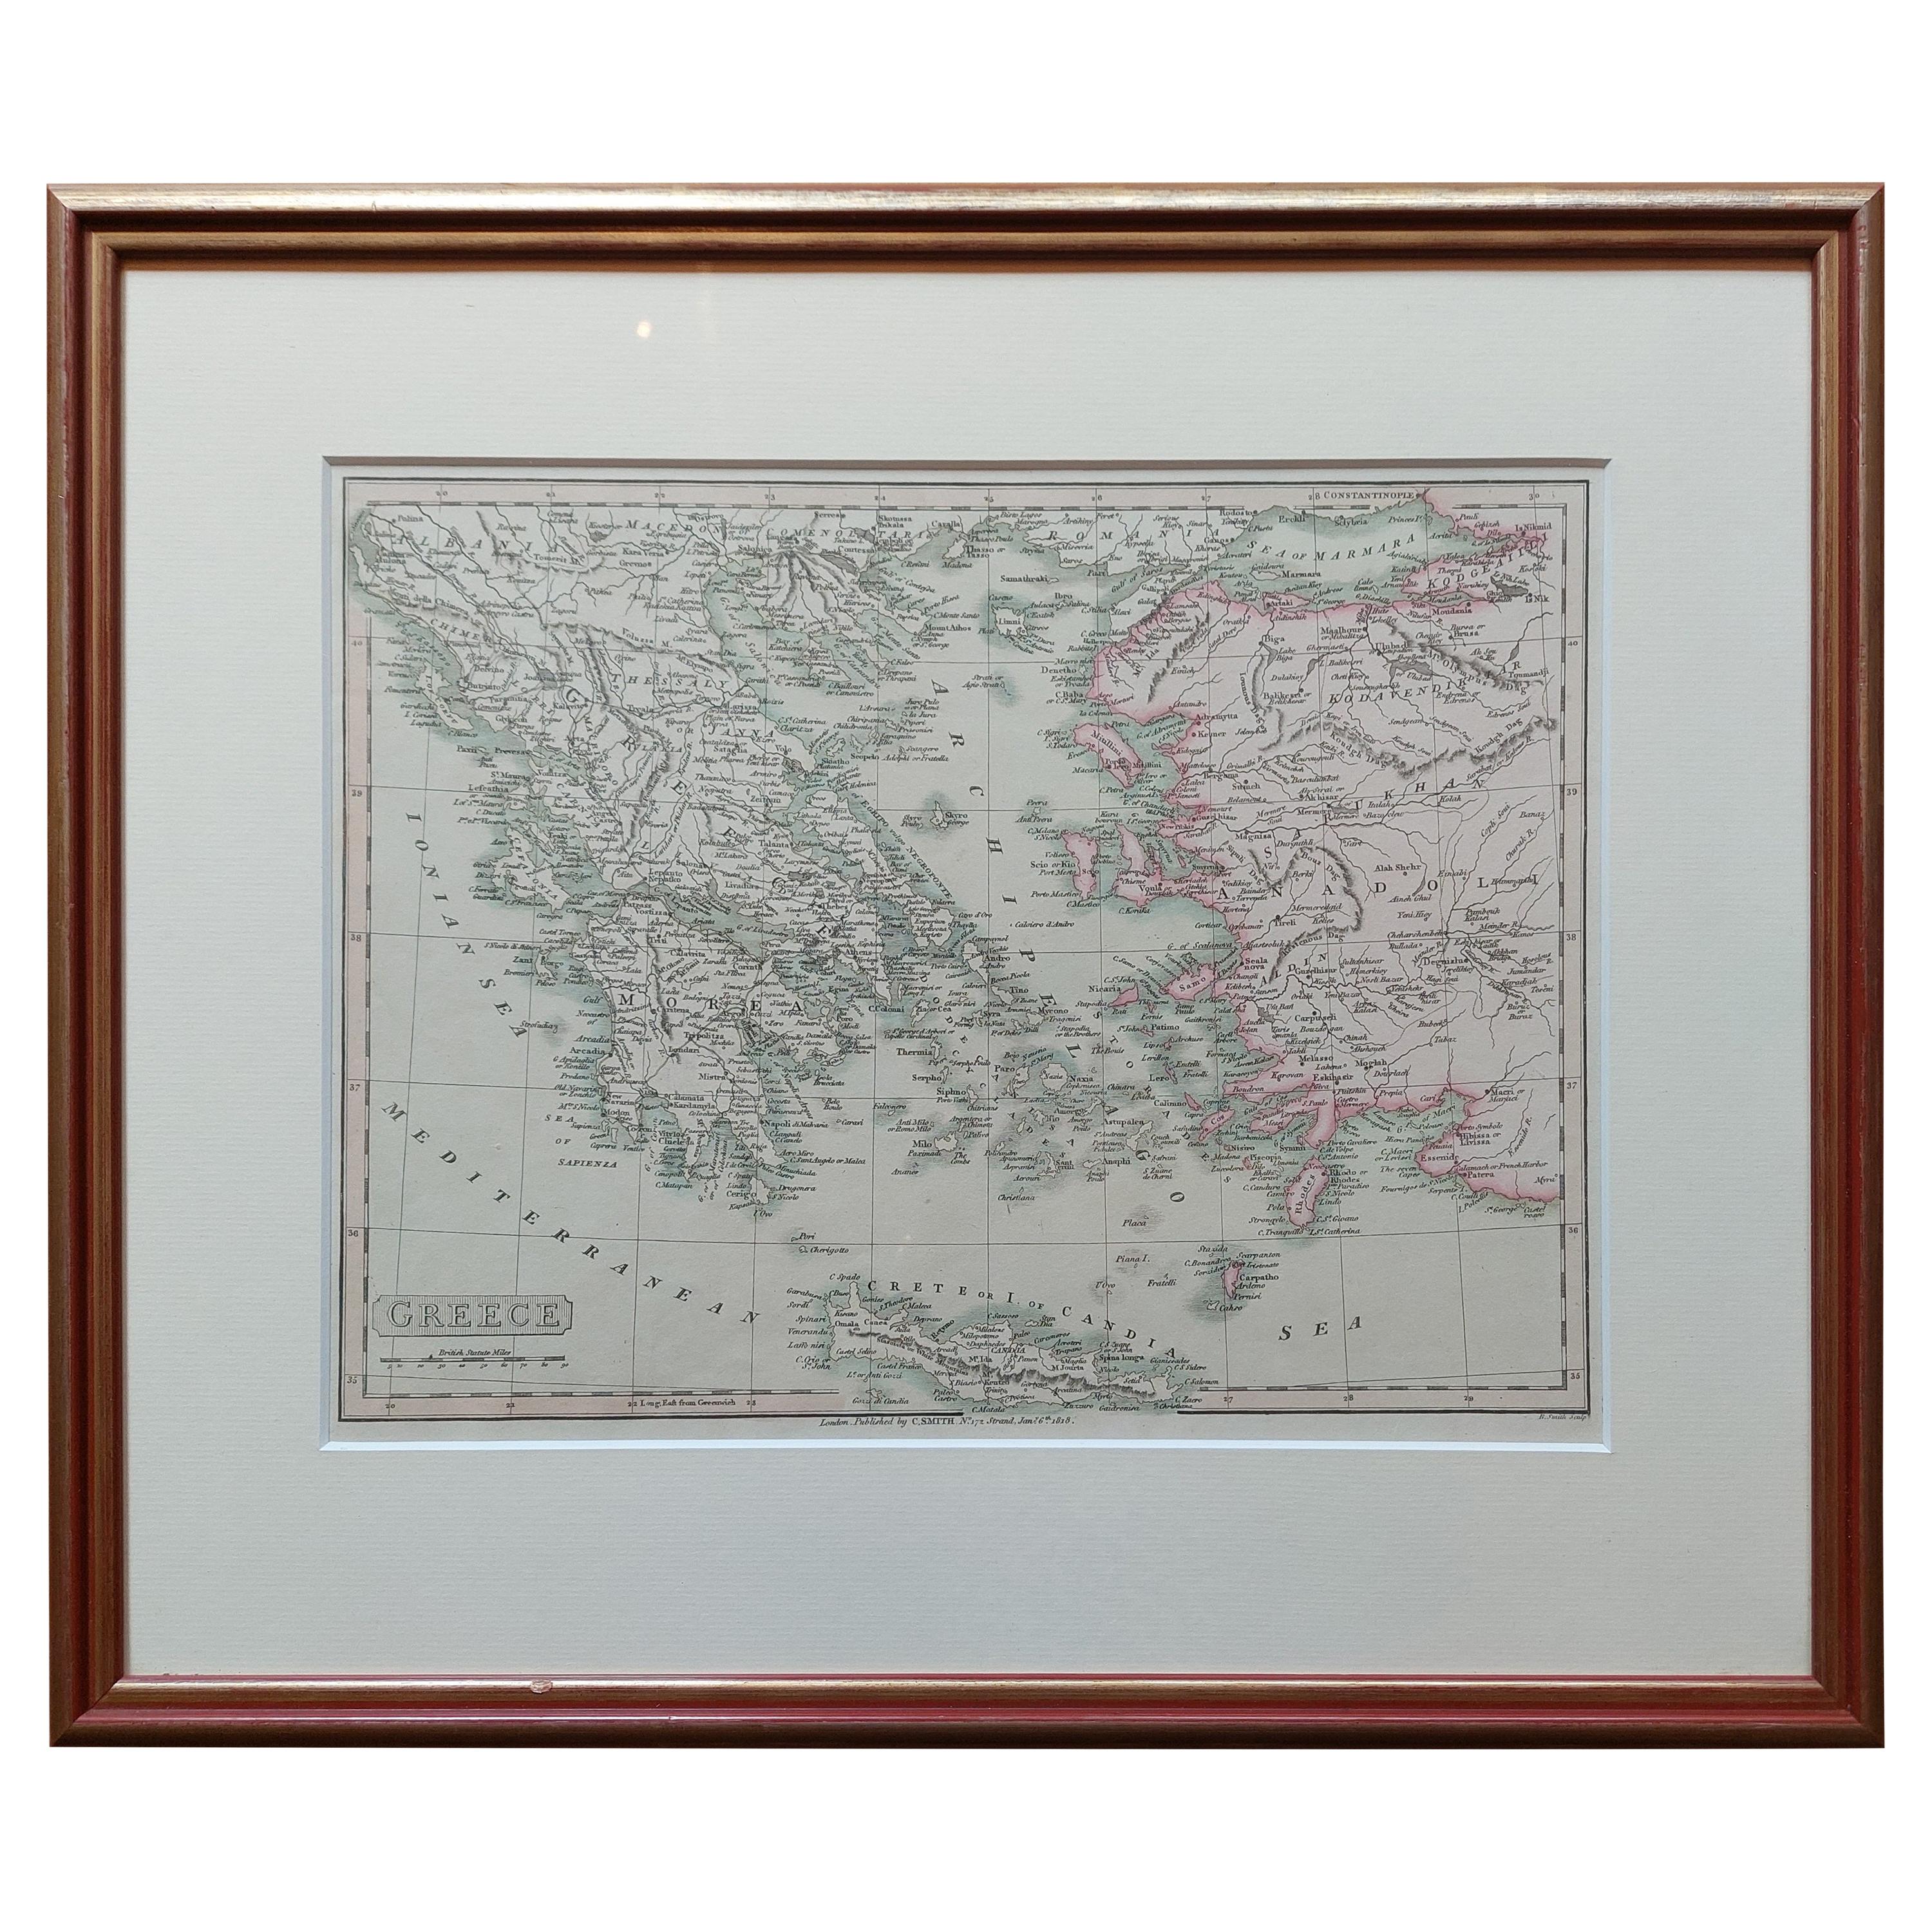 Antique Map of Greece by Smith '1818'